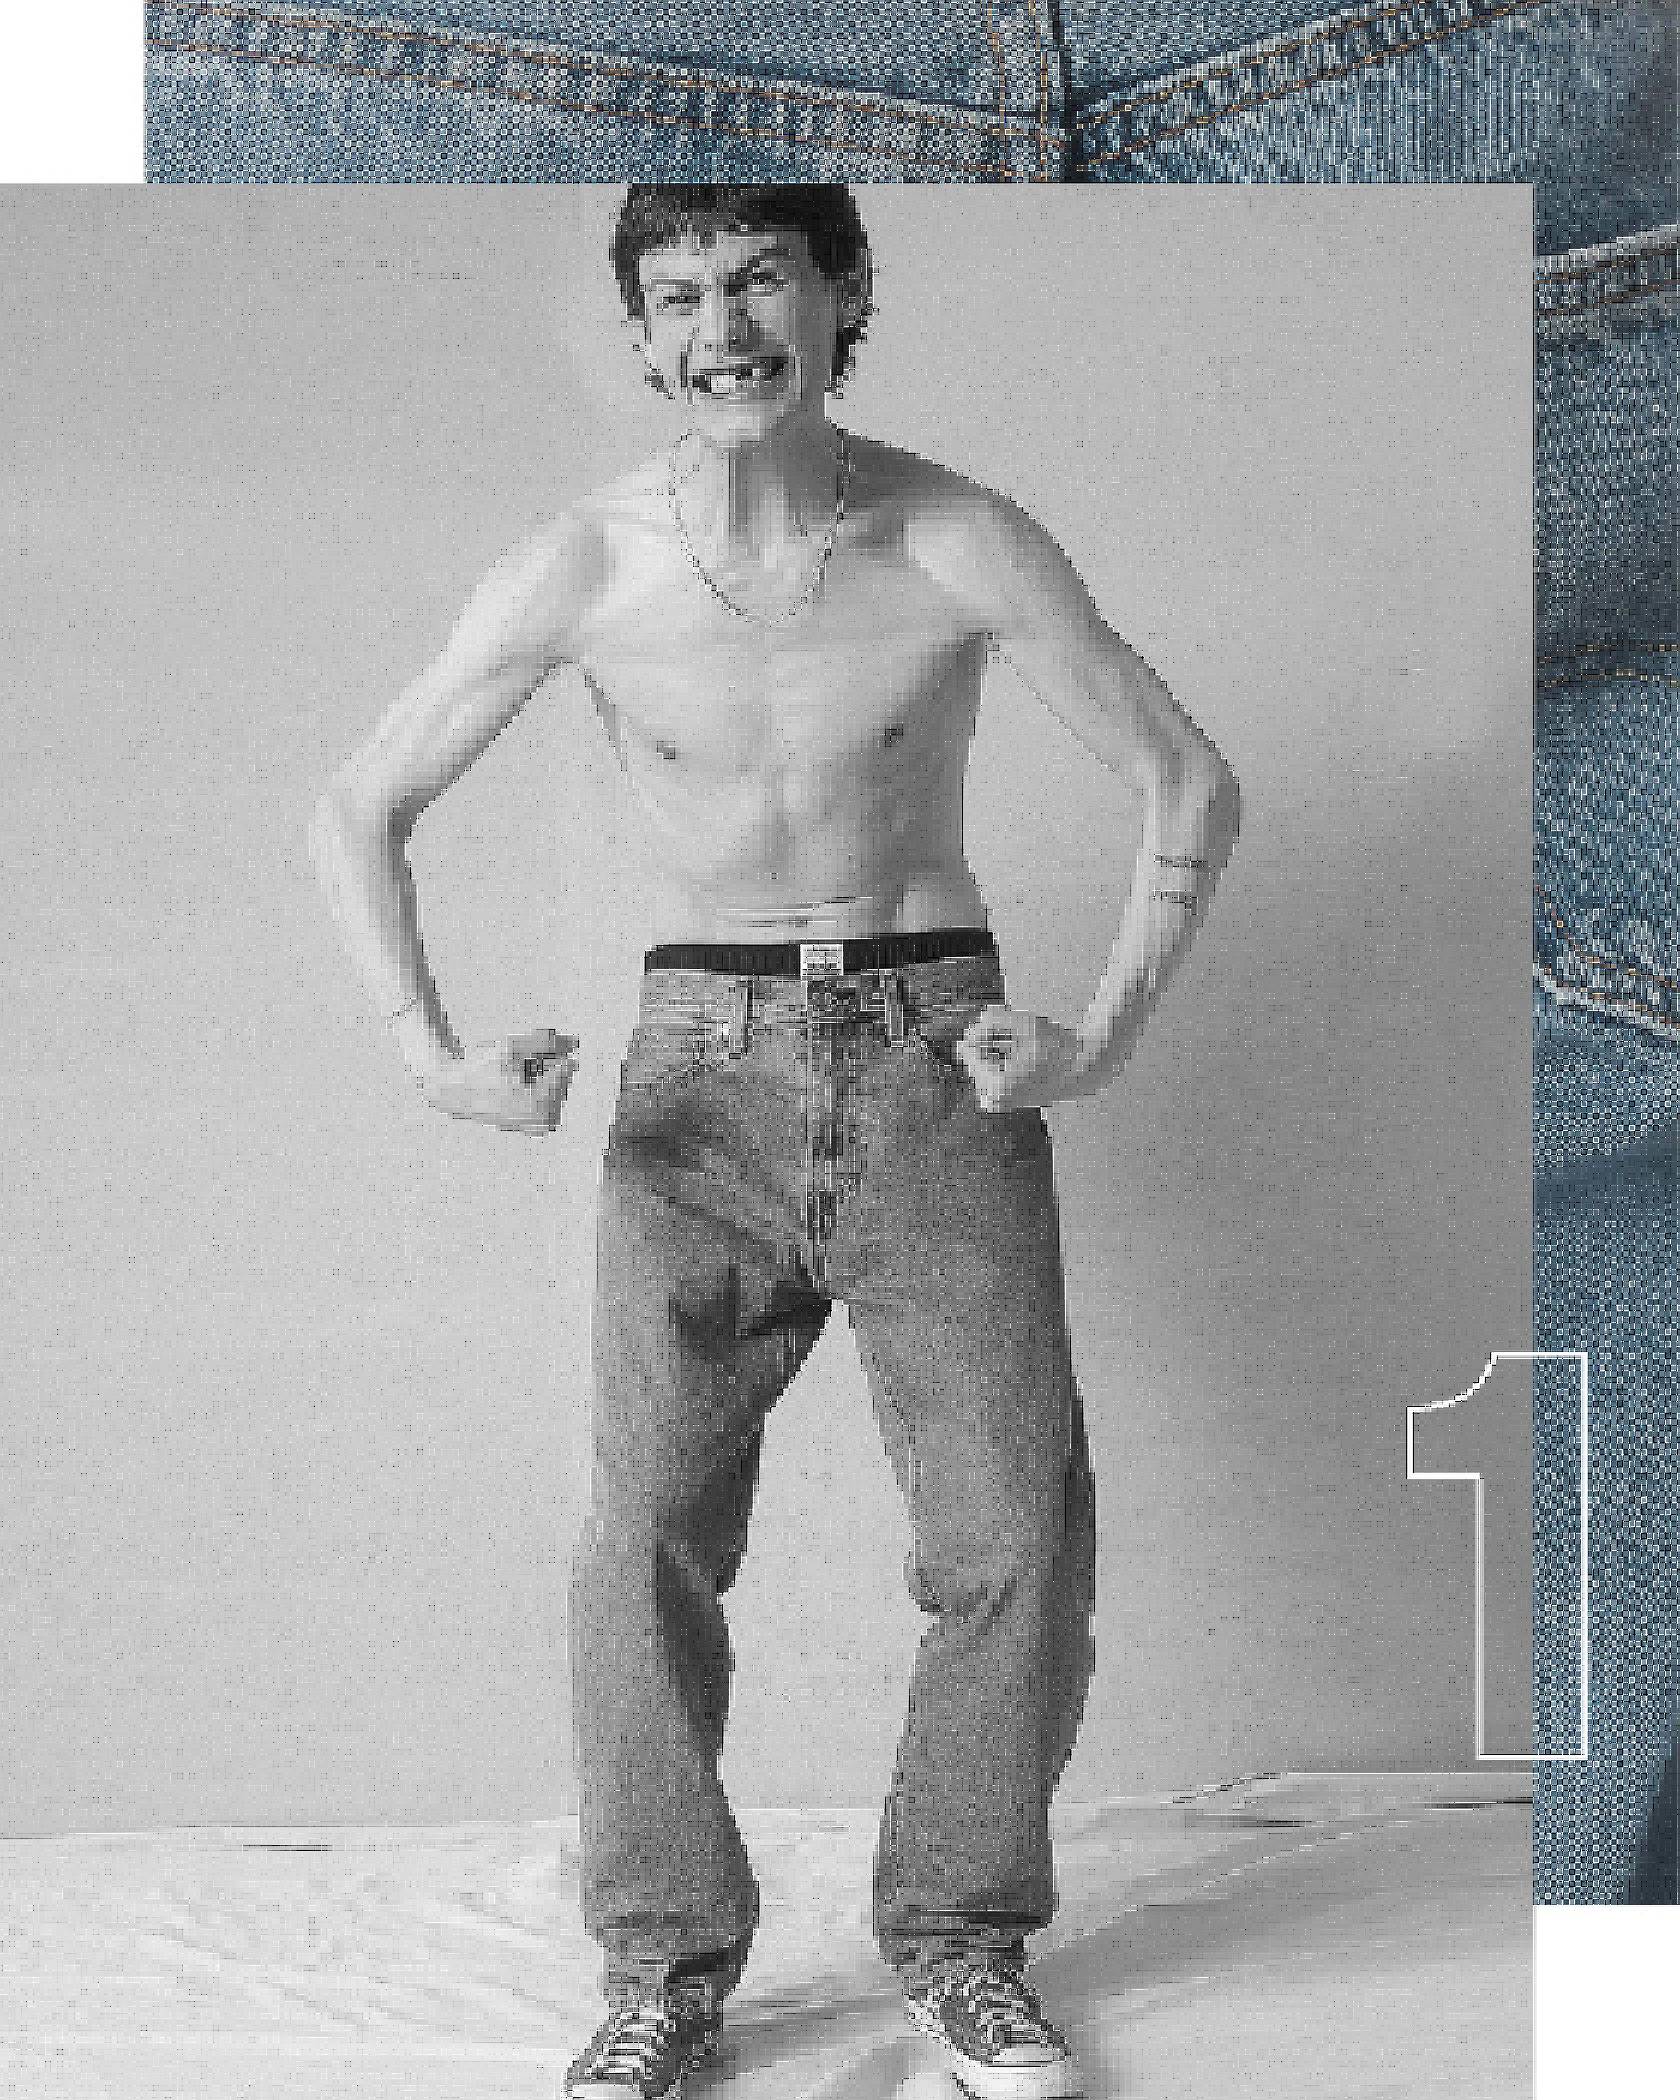 man without shirt and wearing jeans